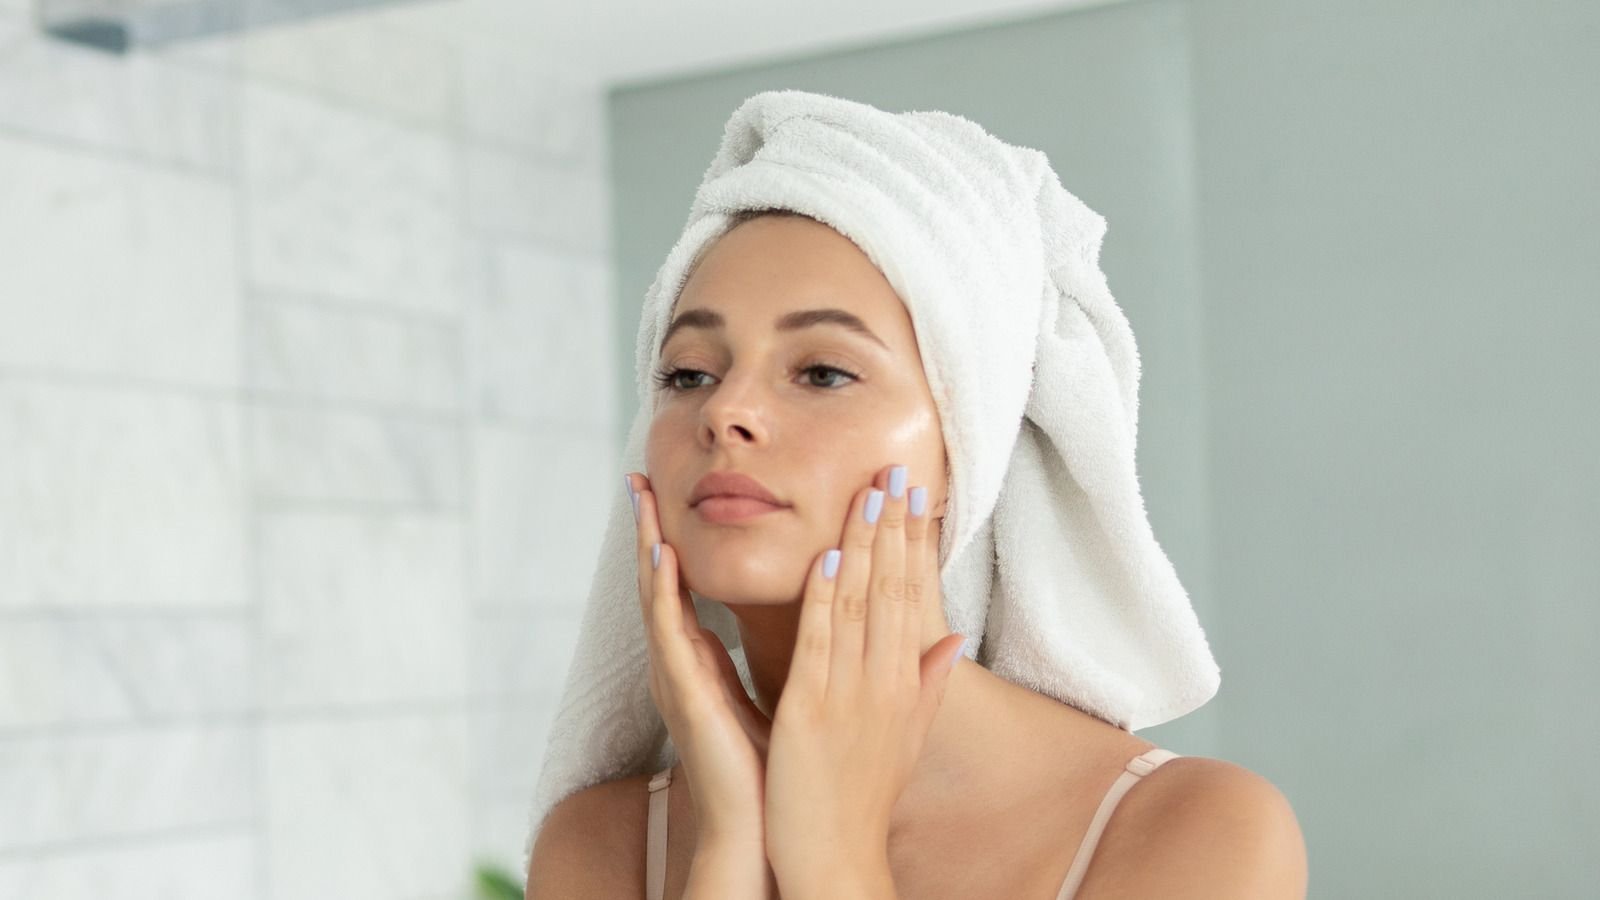 10 Common Skincare Mistakes and How to Avoid Them